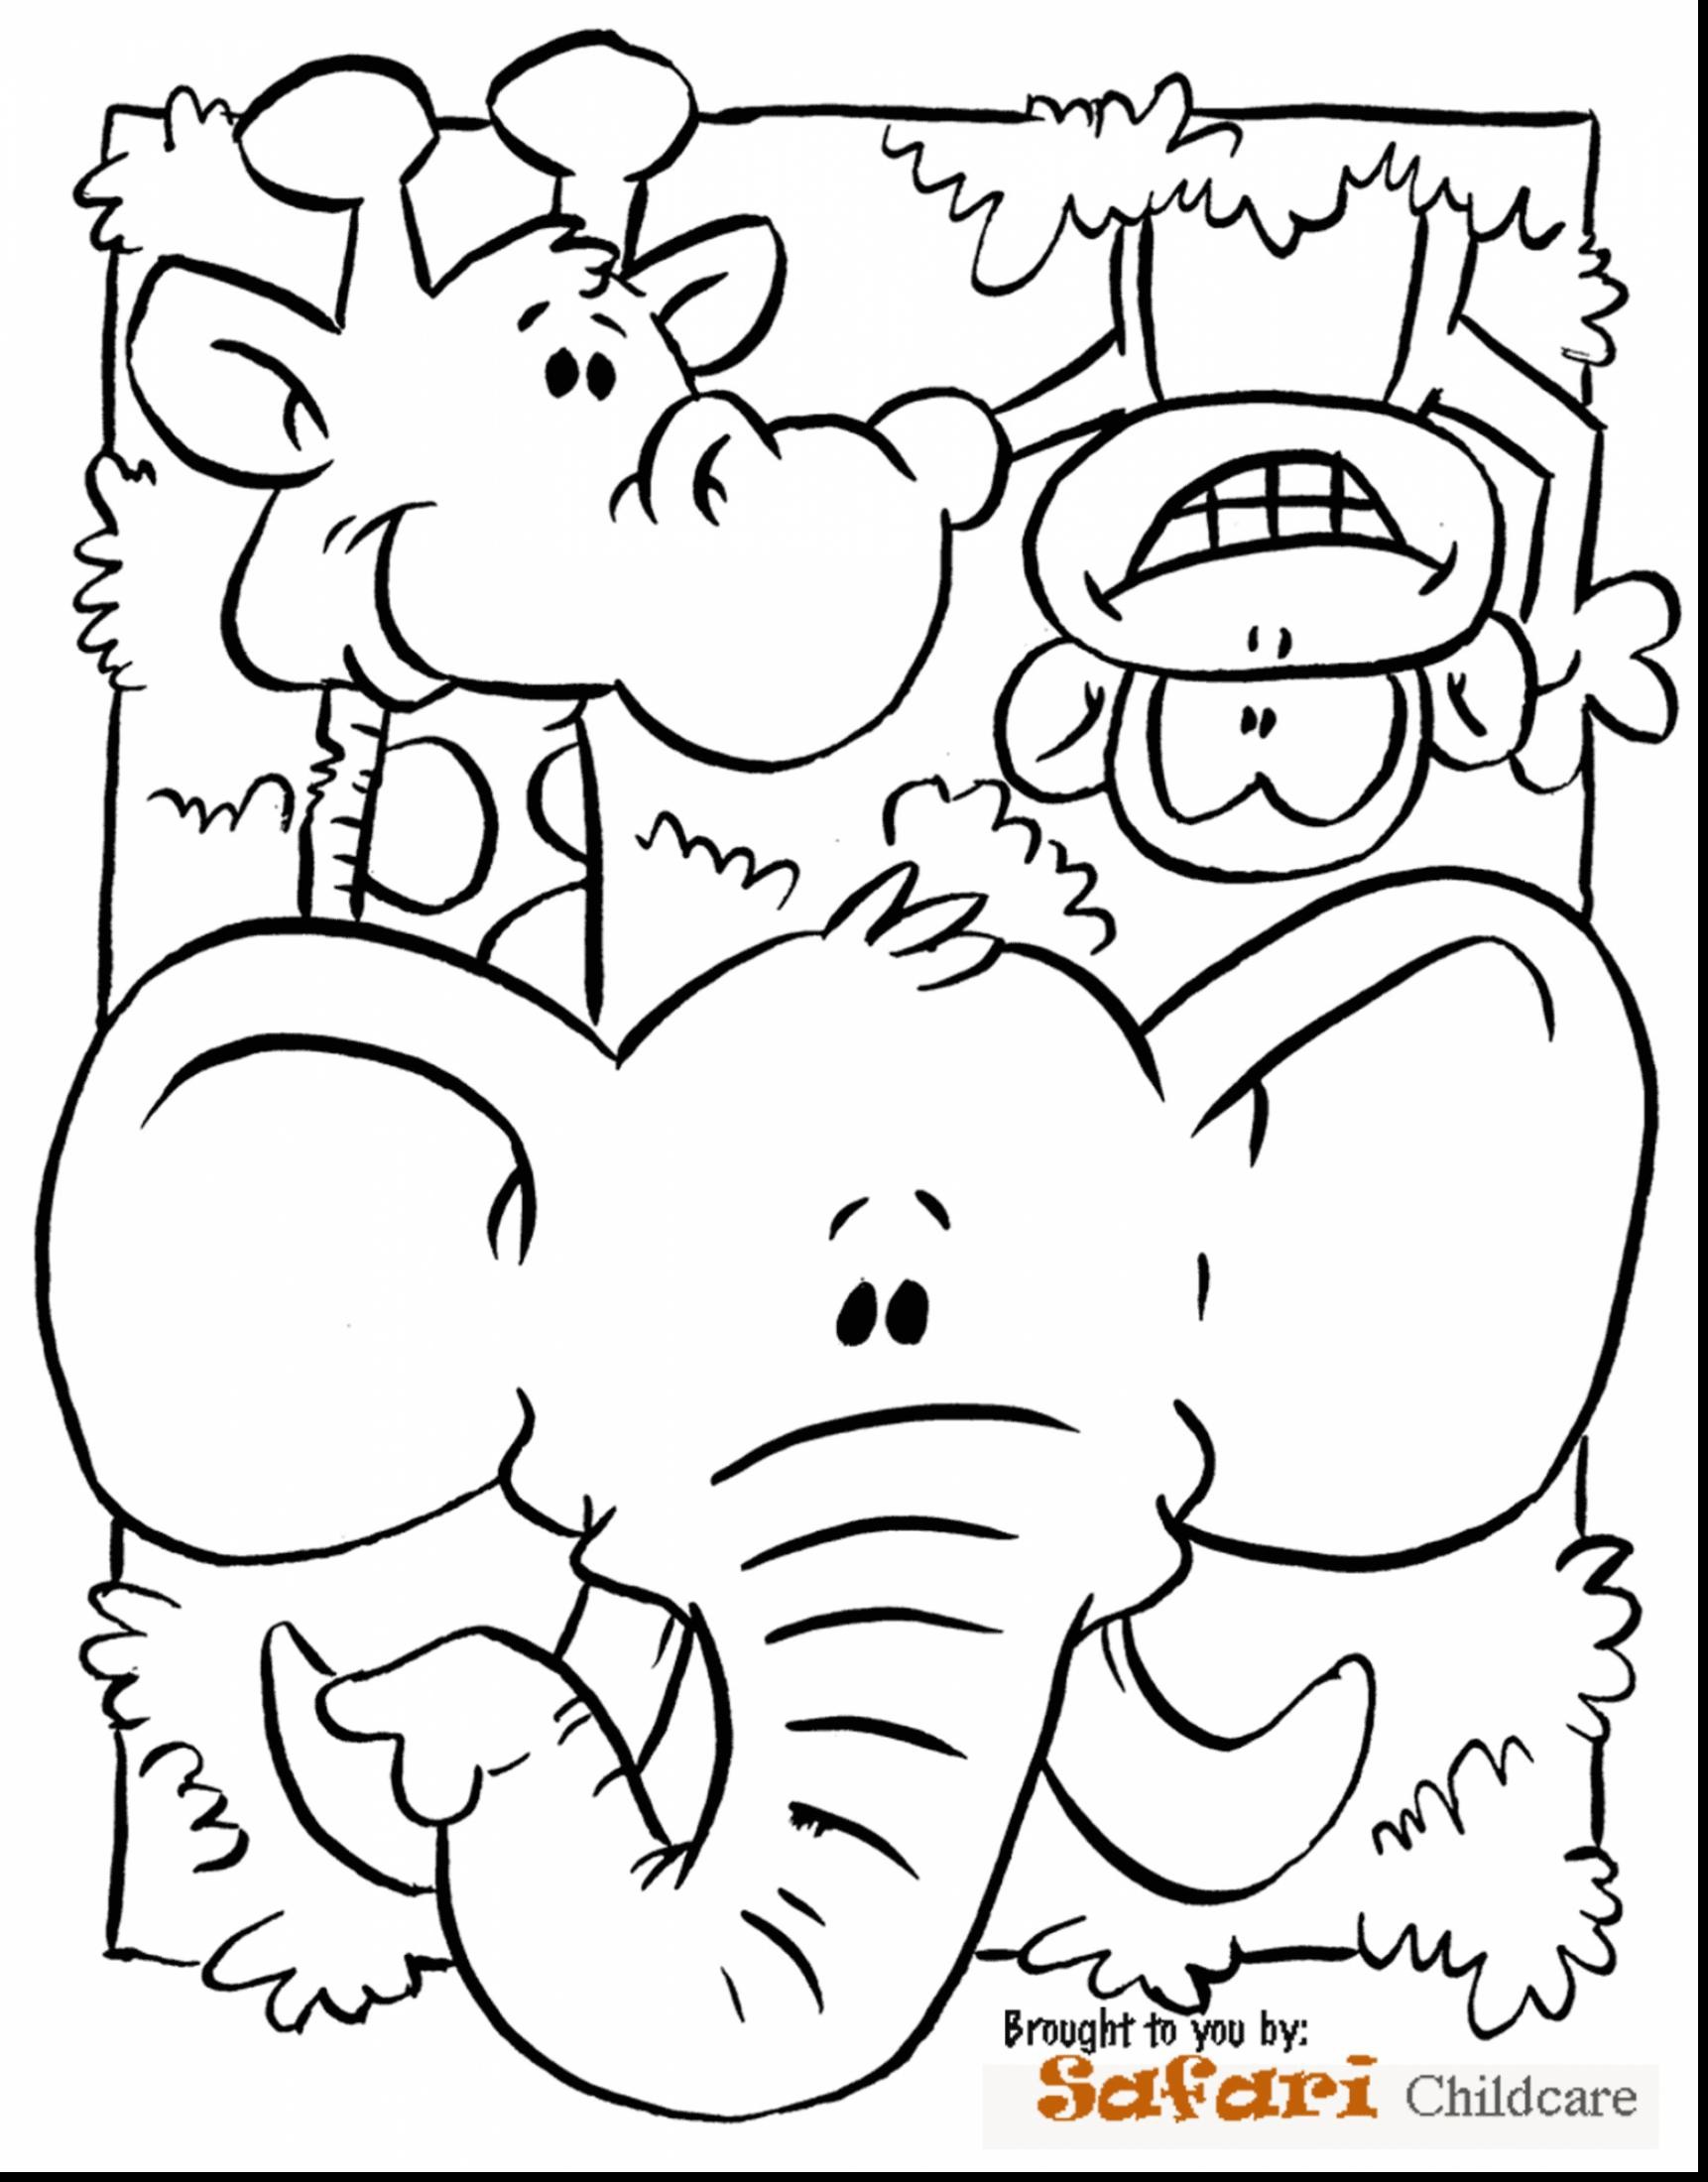 Jungle Animals Coloring Pages